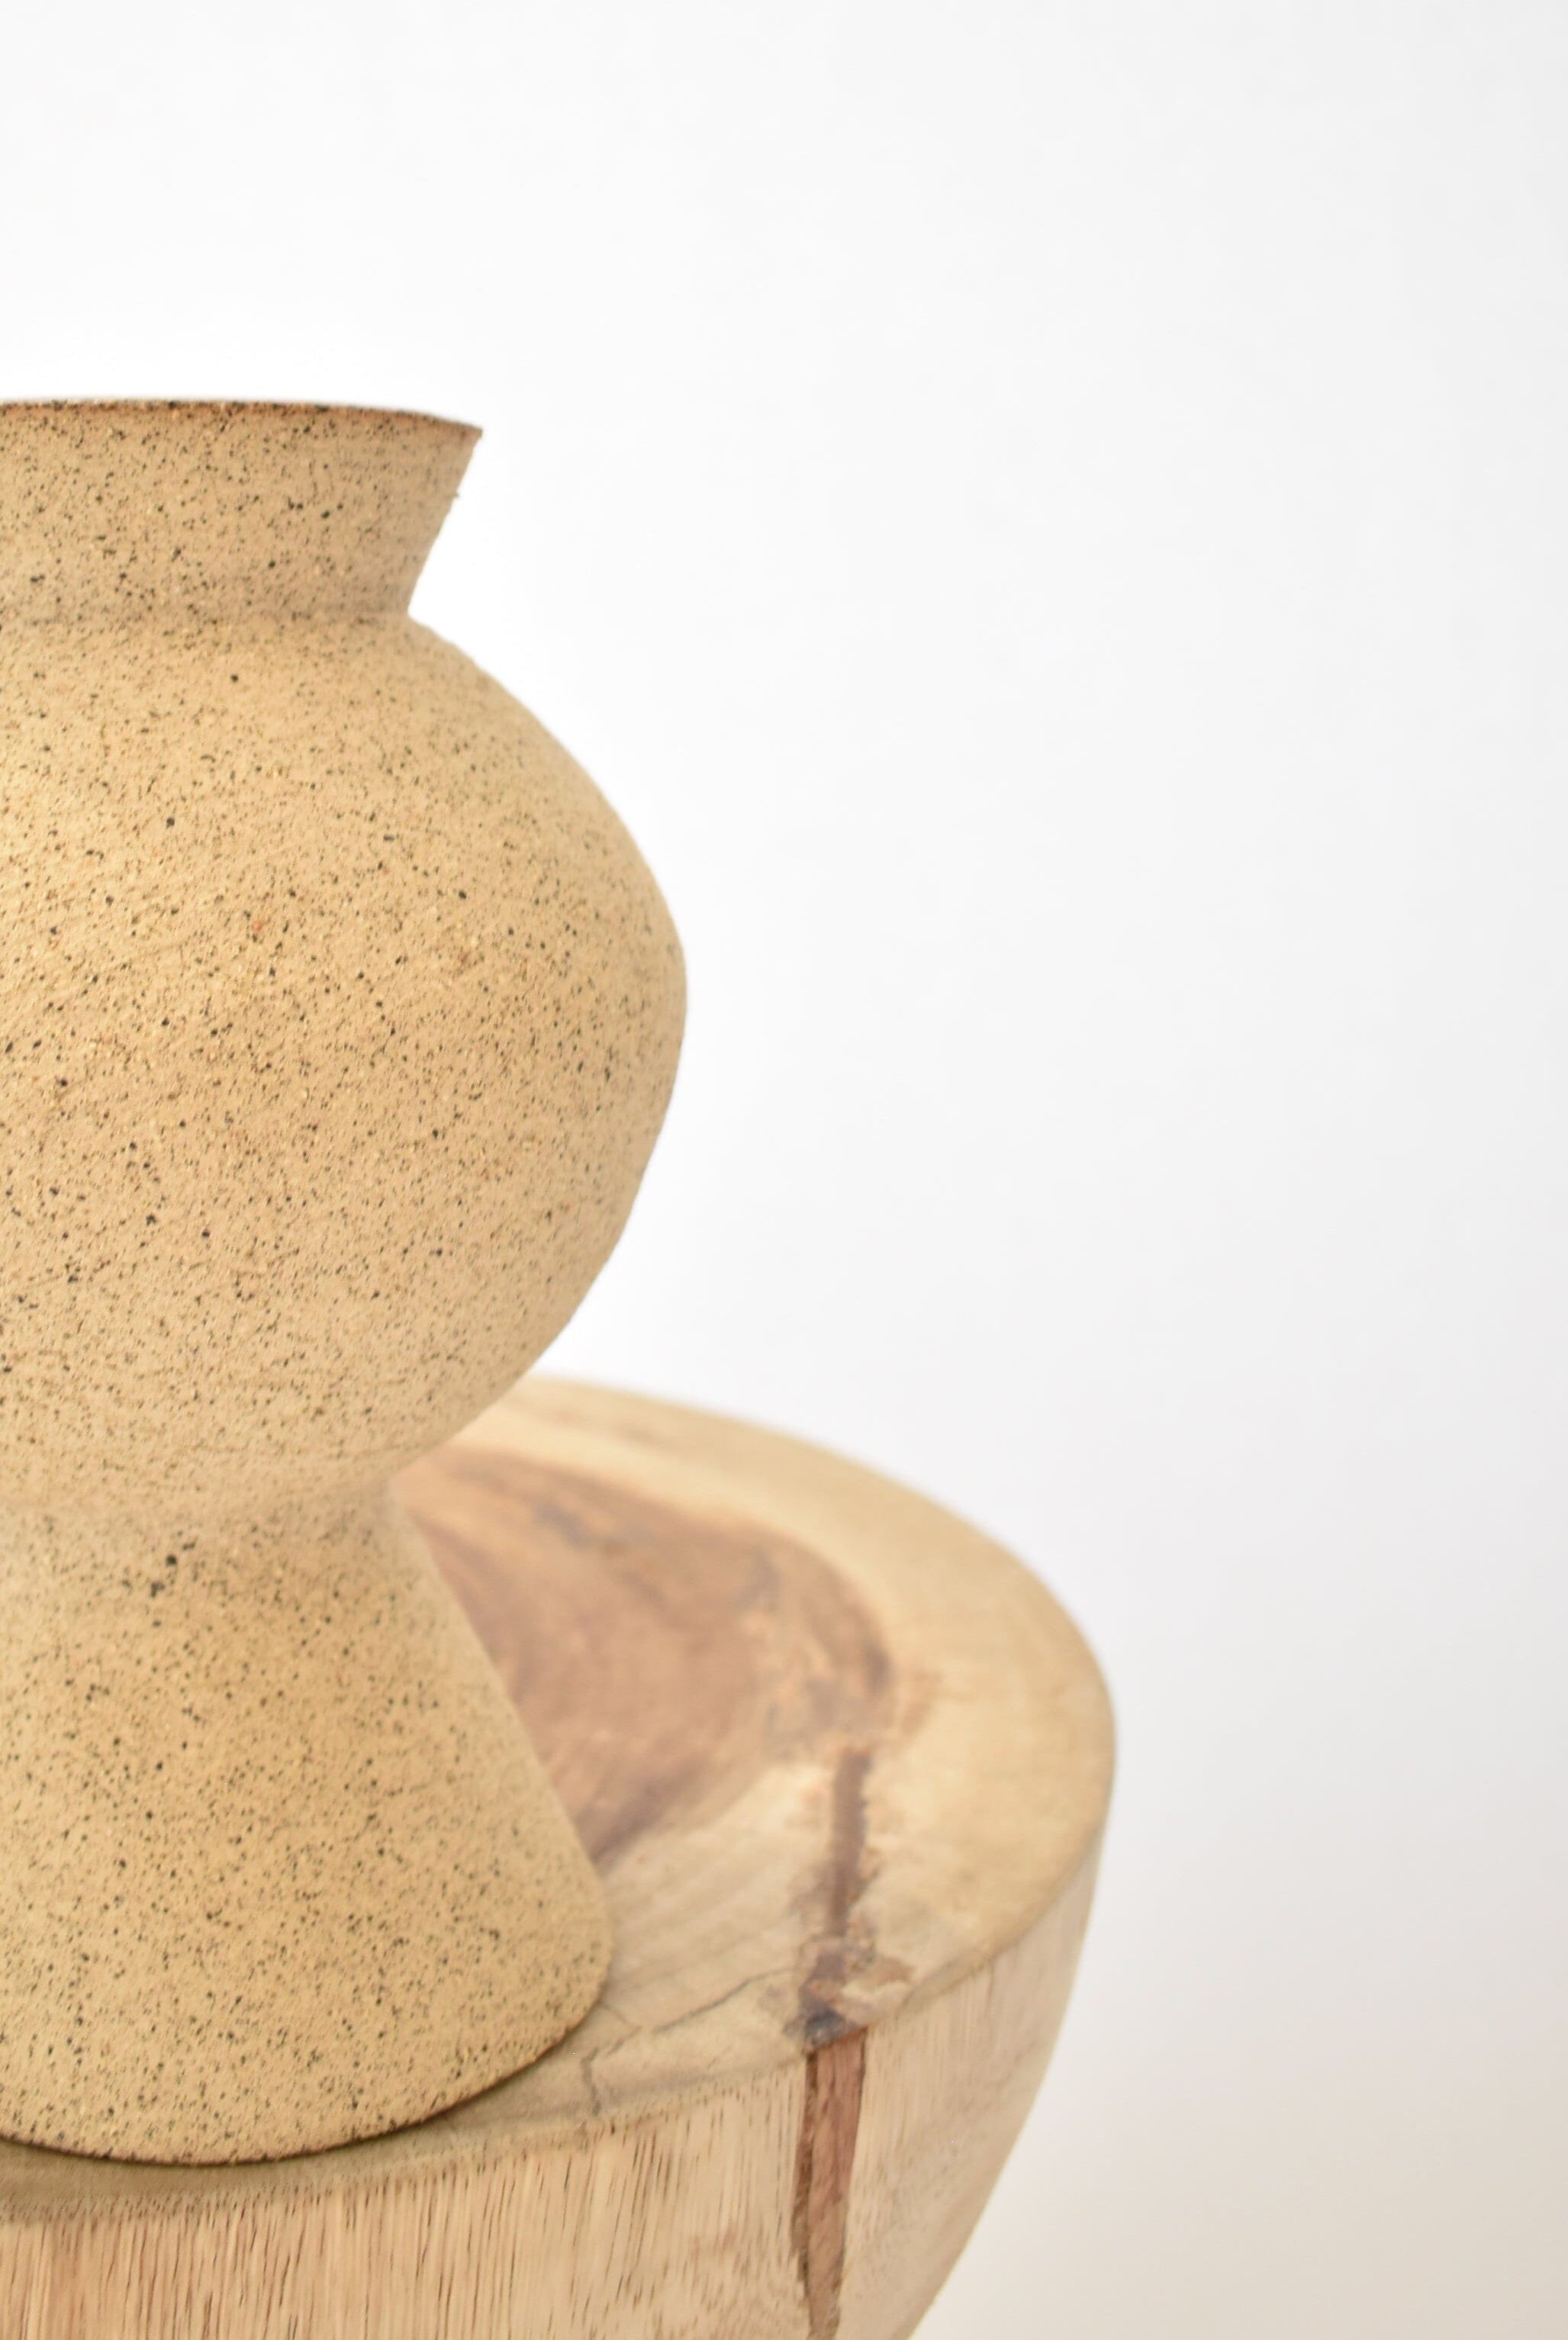 Ruby Bell Ceramics | Squat Round Vase With Conic Pedestal Base In Speckled Clay - SHOP YUCCA Ceramic RUBY BELL CERAMICS - YUCCA 